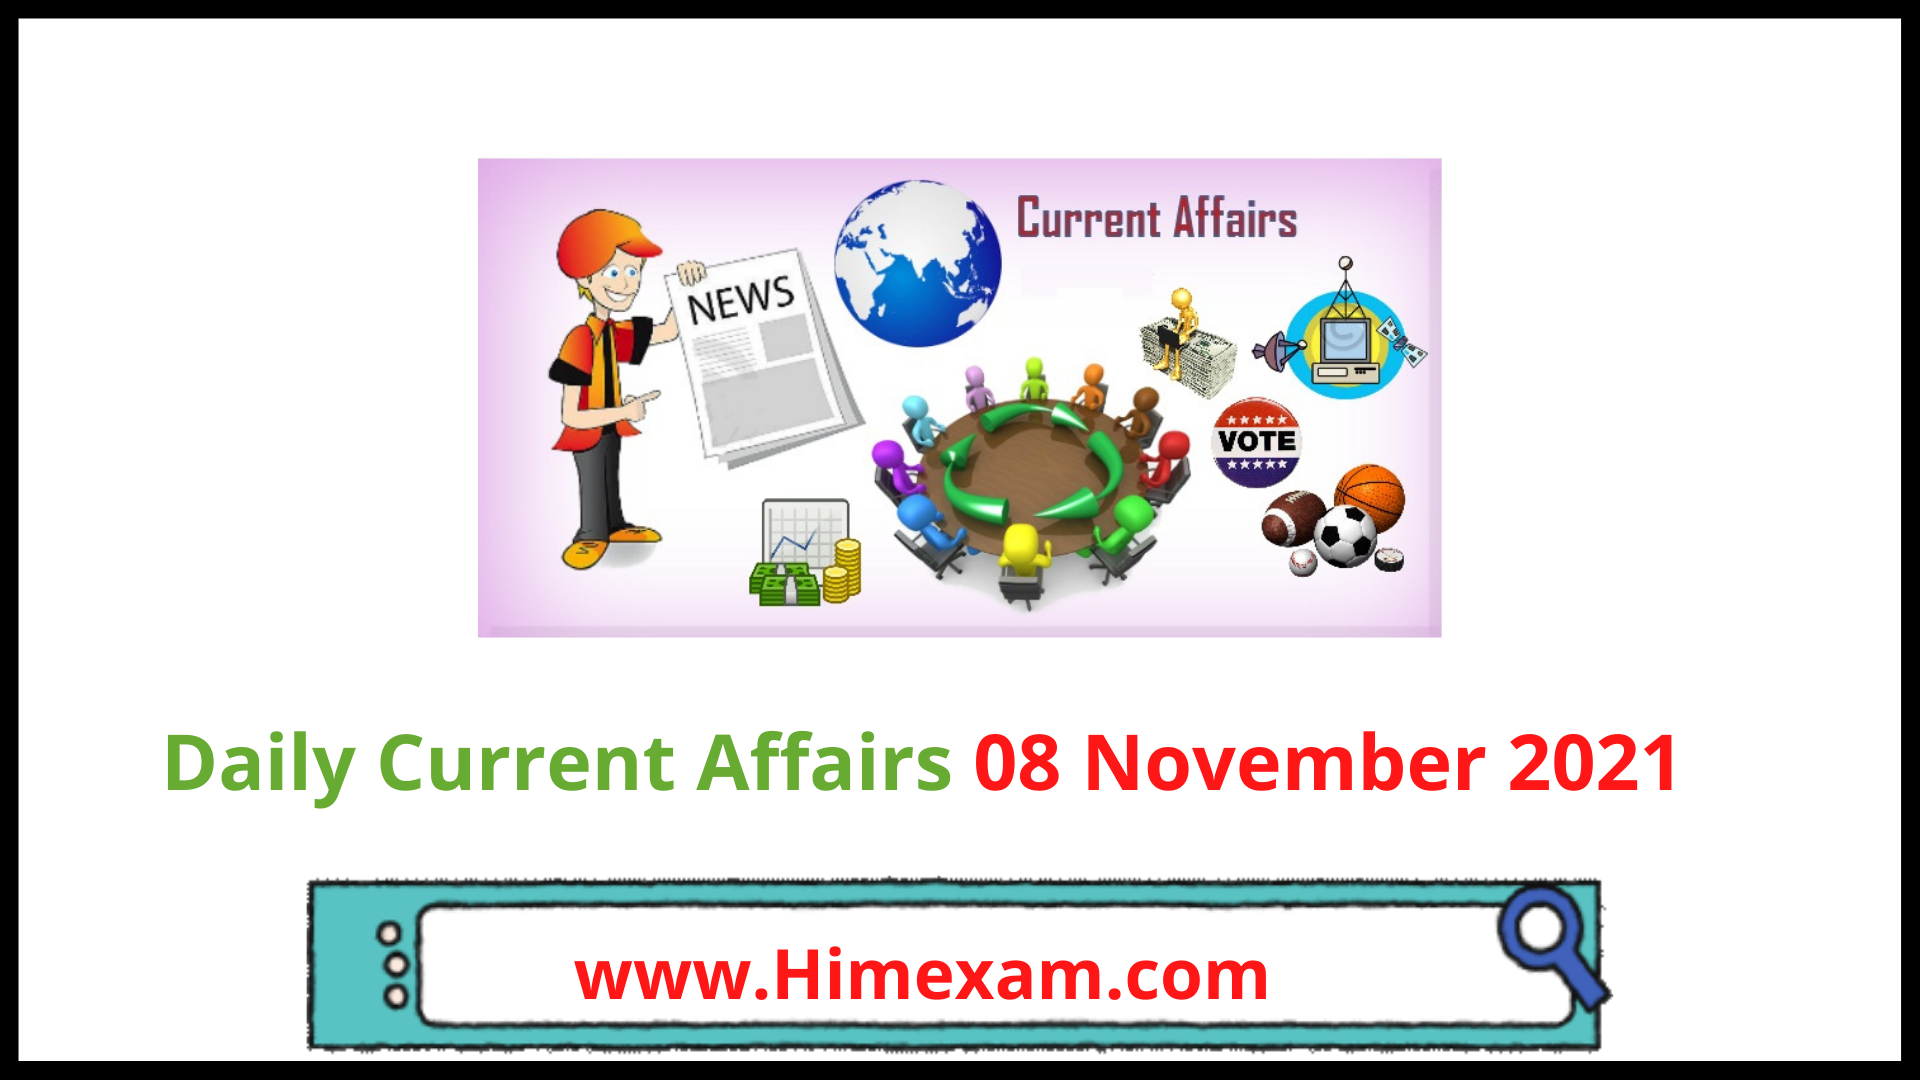 Daily Current Affairs 08 November 2021